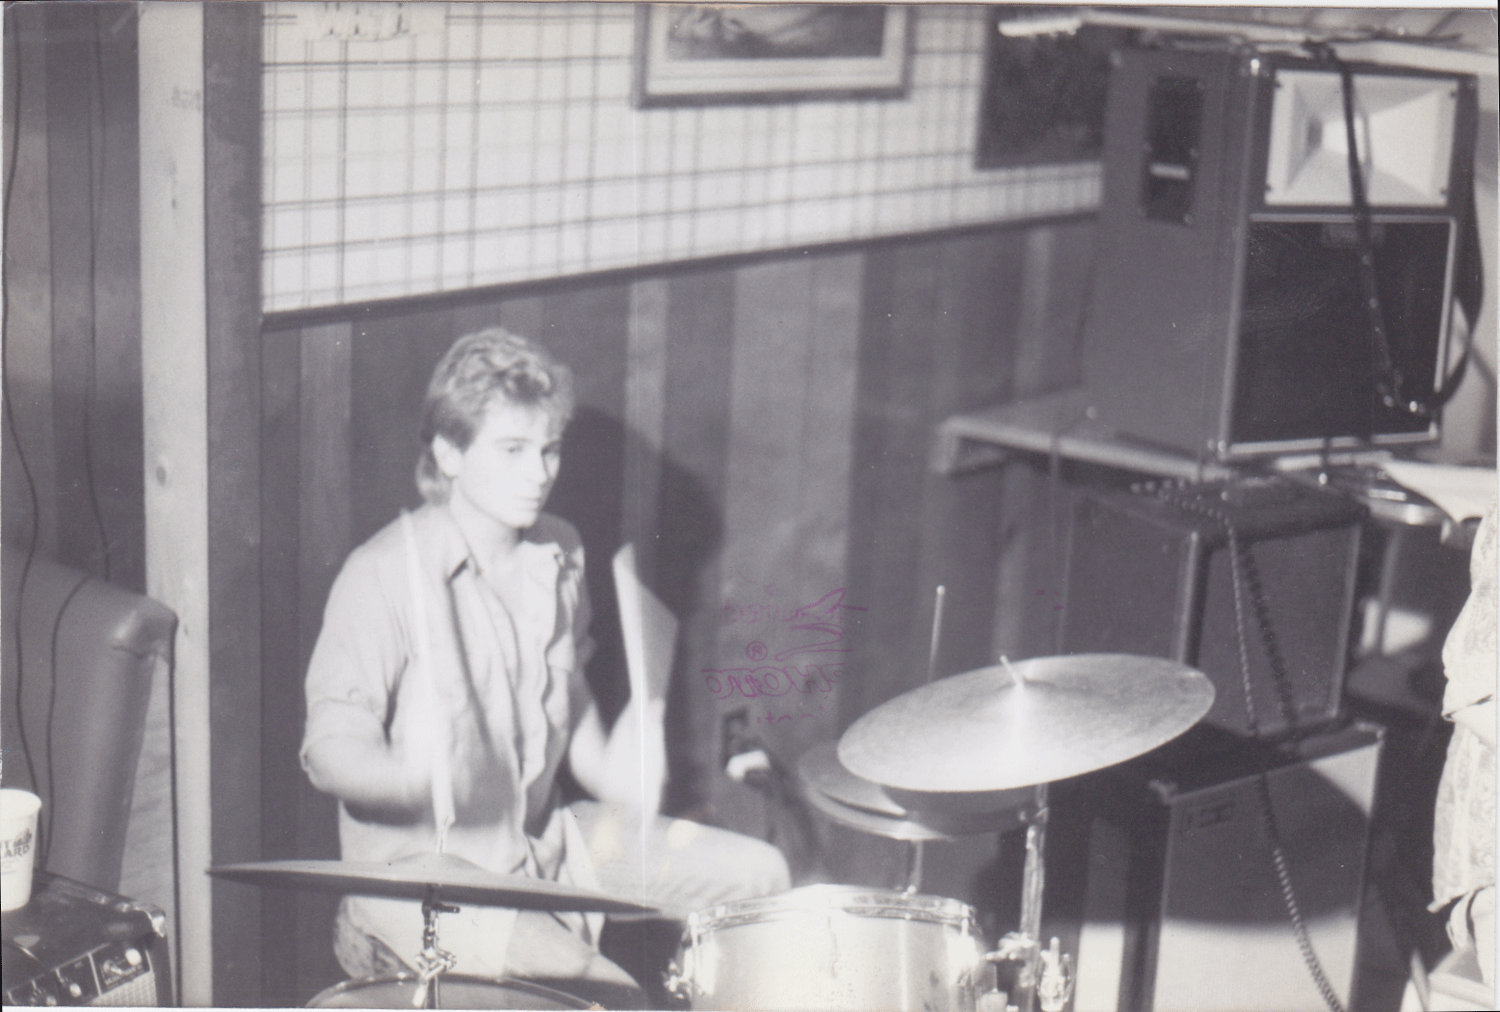 Tony Peterson of The Value at Dale's, Chattanooga, TN 1984